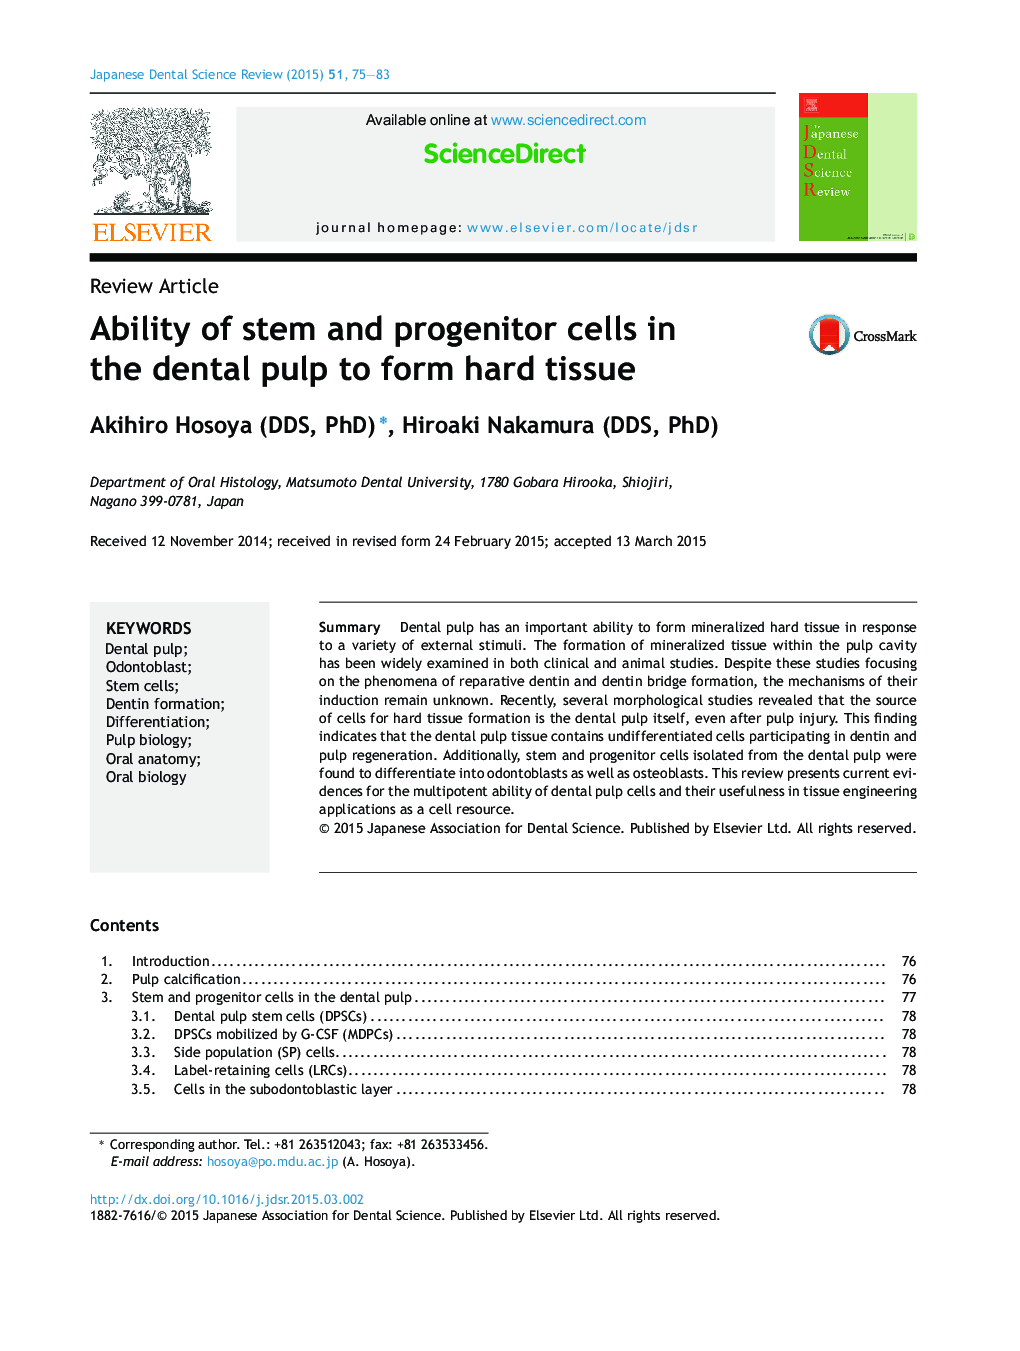 Ability of stem and progenitor cells in the dental pulp to form hard tissue